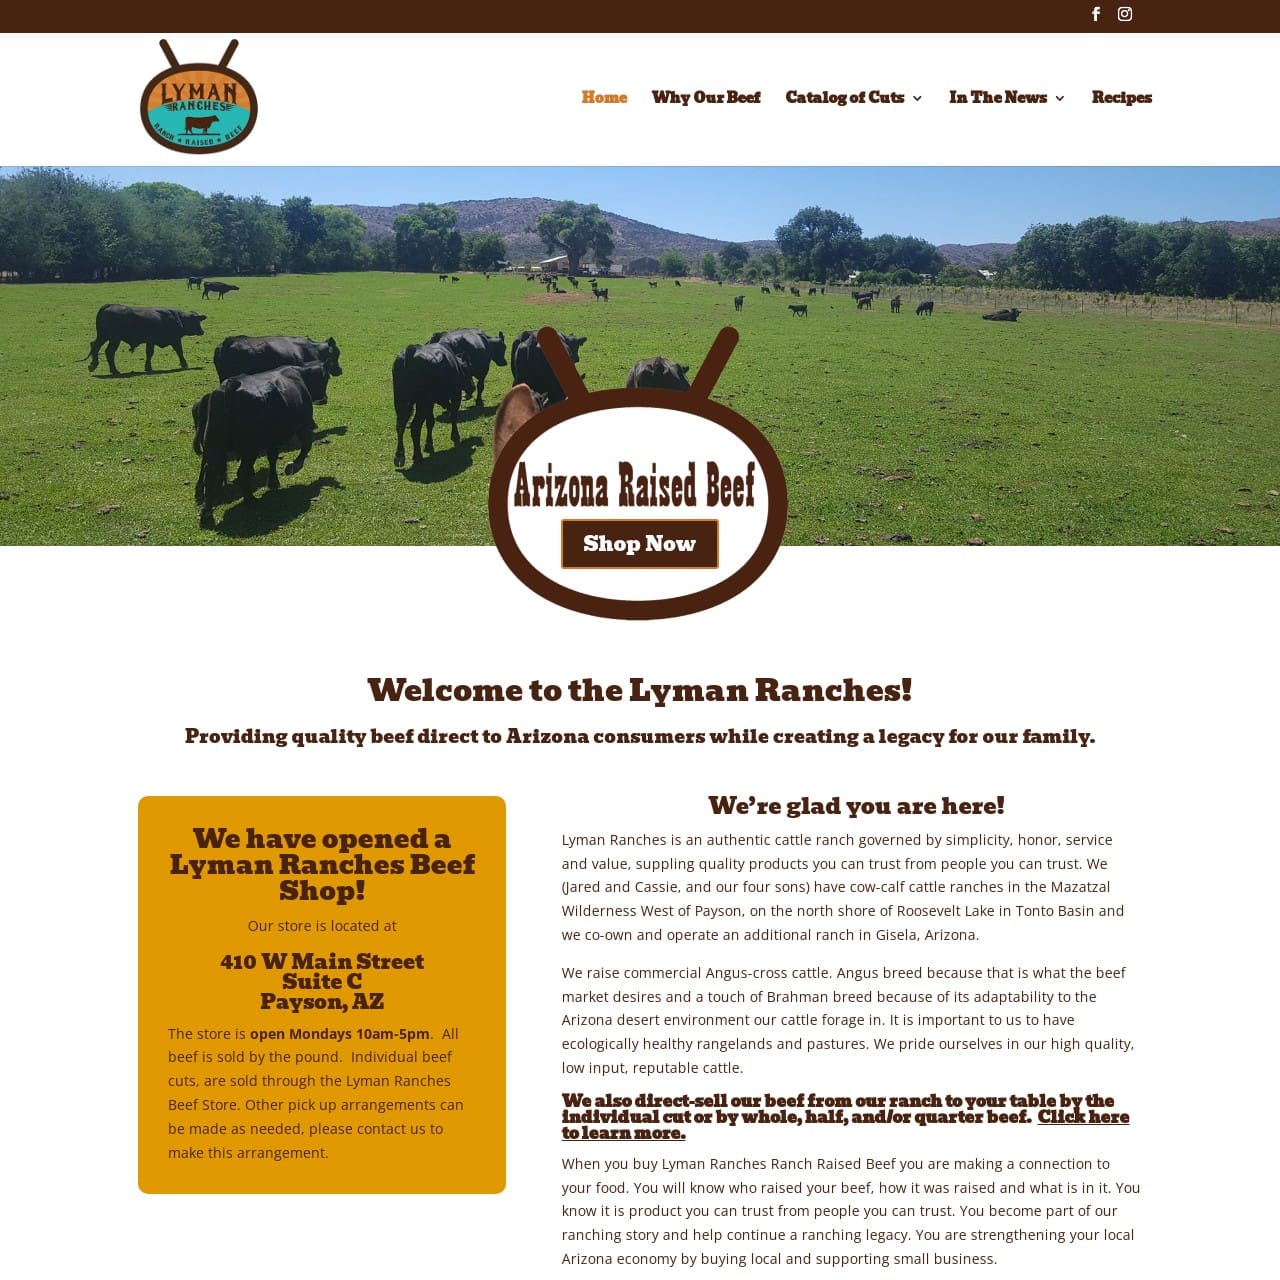 Celebrate the spirit of community as Shield Bar Marketing donates a website design and hosting package to Lyman Ranch, a proud Arizona rancher displaced by wildfire, creating a captivating online presence that incorporates their existing brand and features a user-friendly shopping cart.